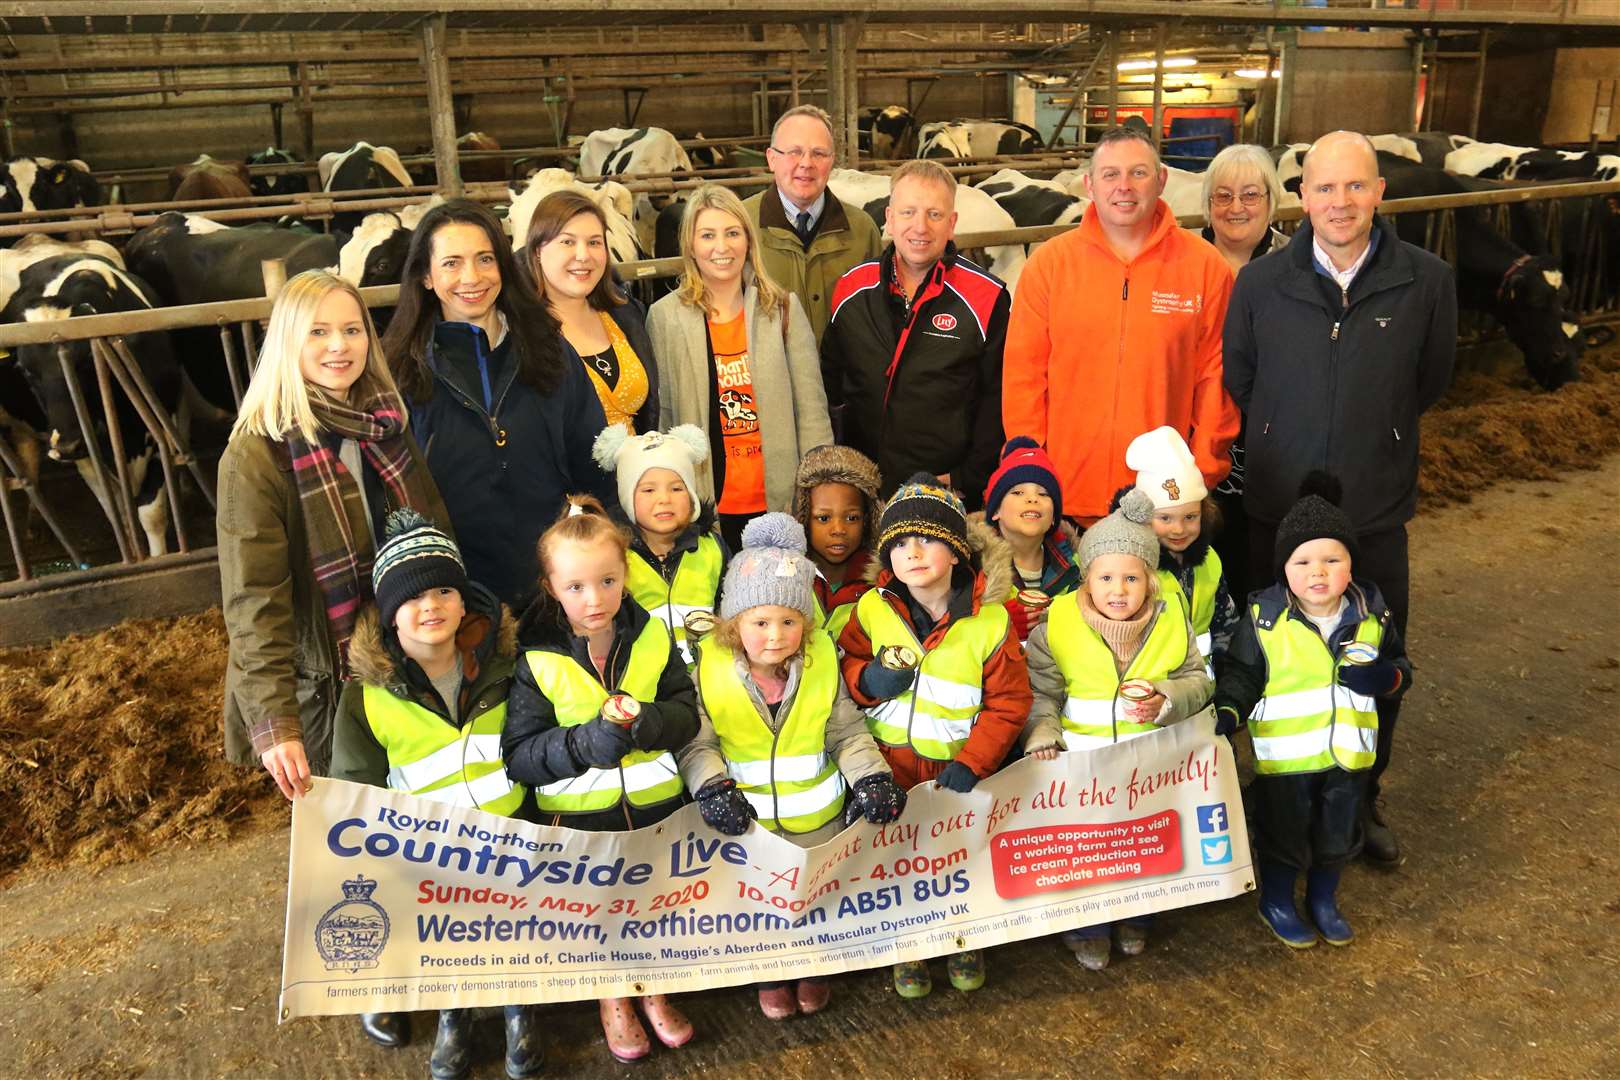 The RNAS and children from Cherry Tree Nursery launched the Open Farm Day which will be held at Mackie's.